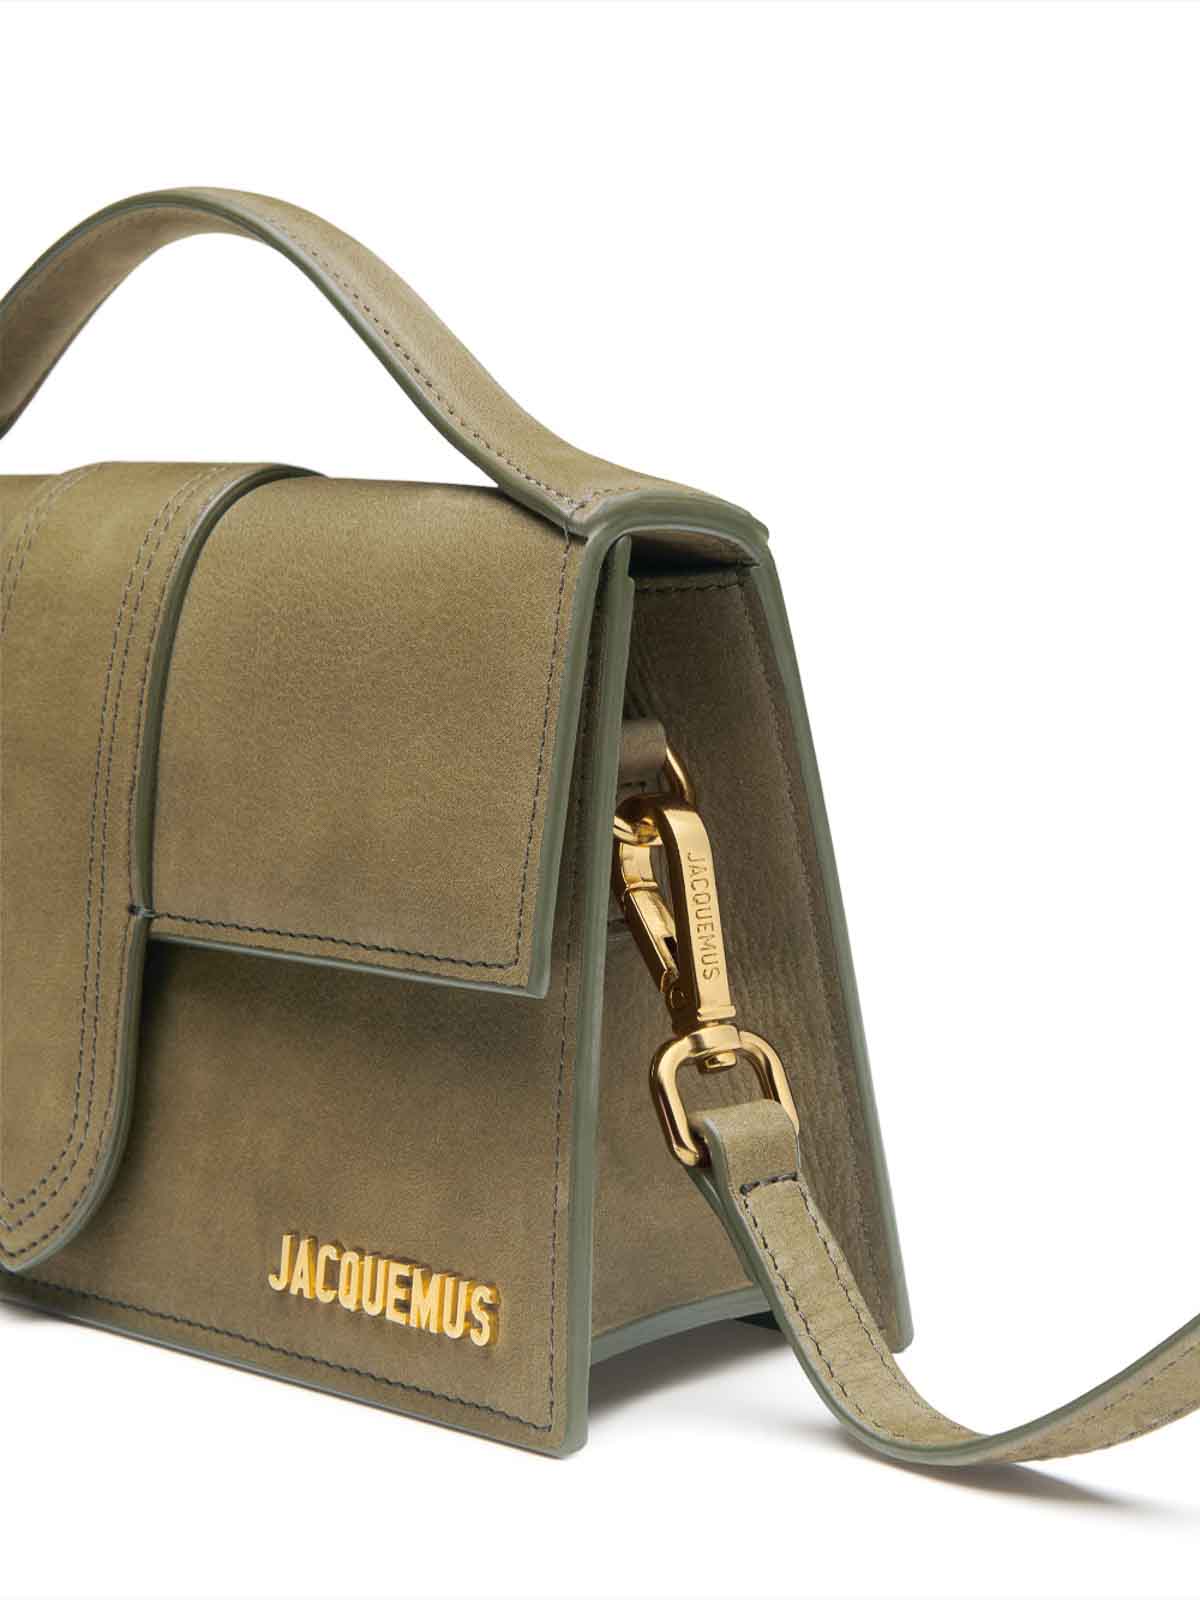 Le Grand Bambino Leather Shoulder Bag in Green - Jacquemus